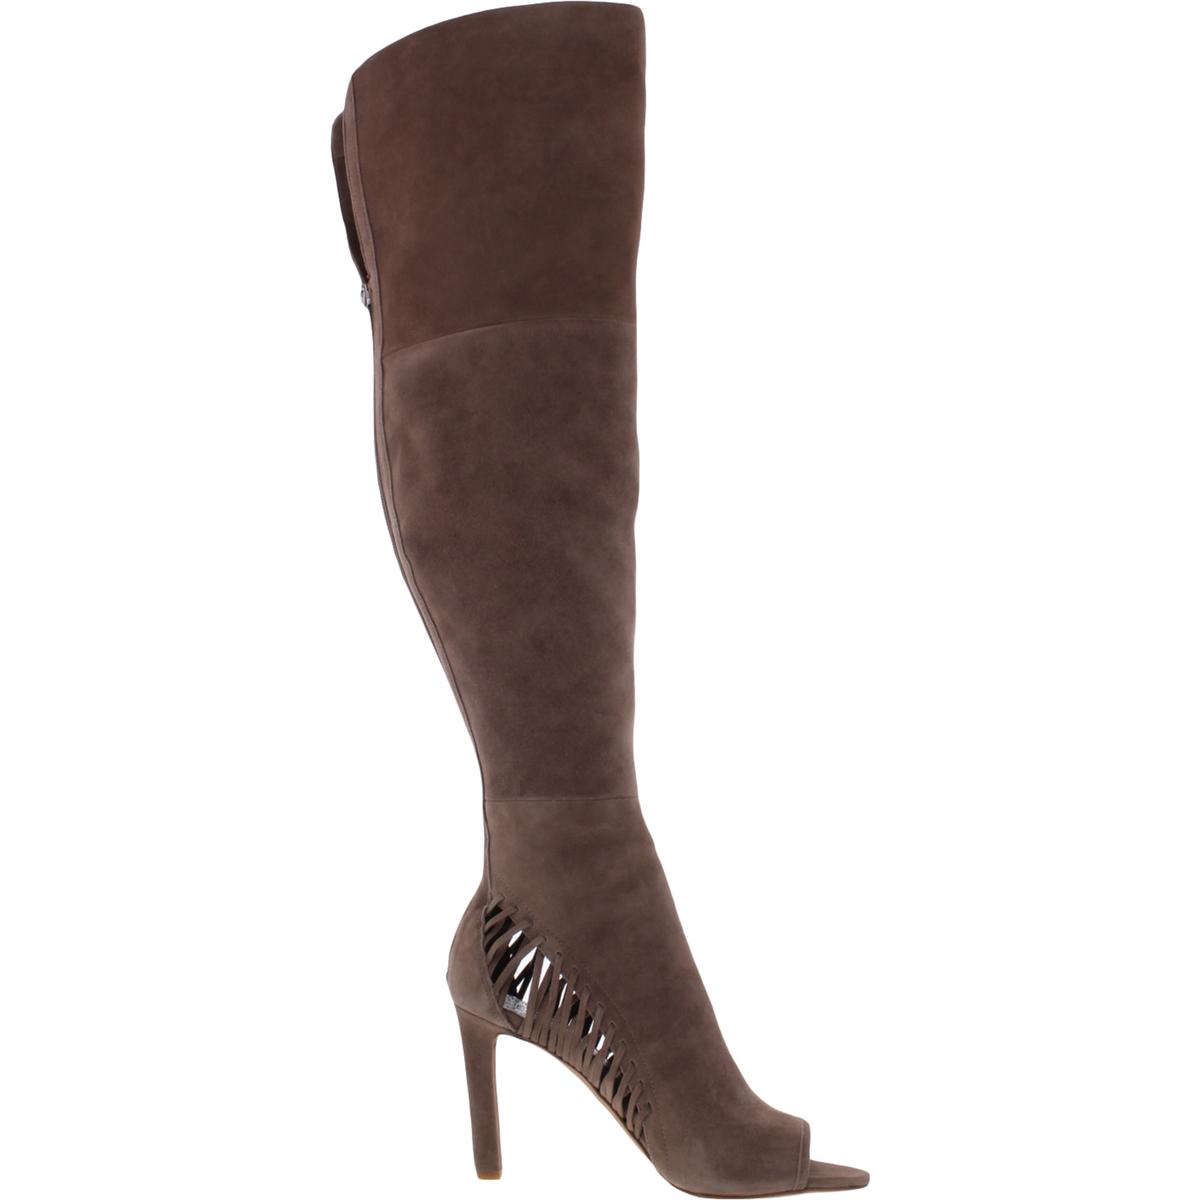 Vince Camuto Womens Shassa Suede Open Toe Over-The-Knee Boots Shoes BHFO 1638 